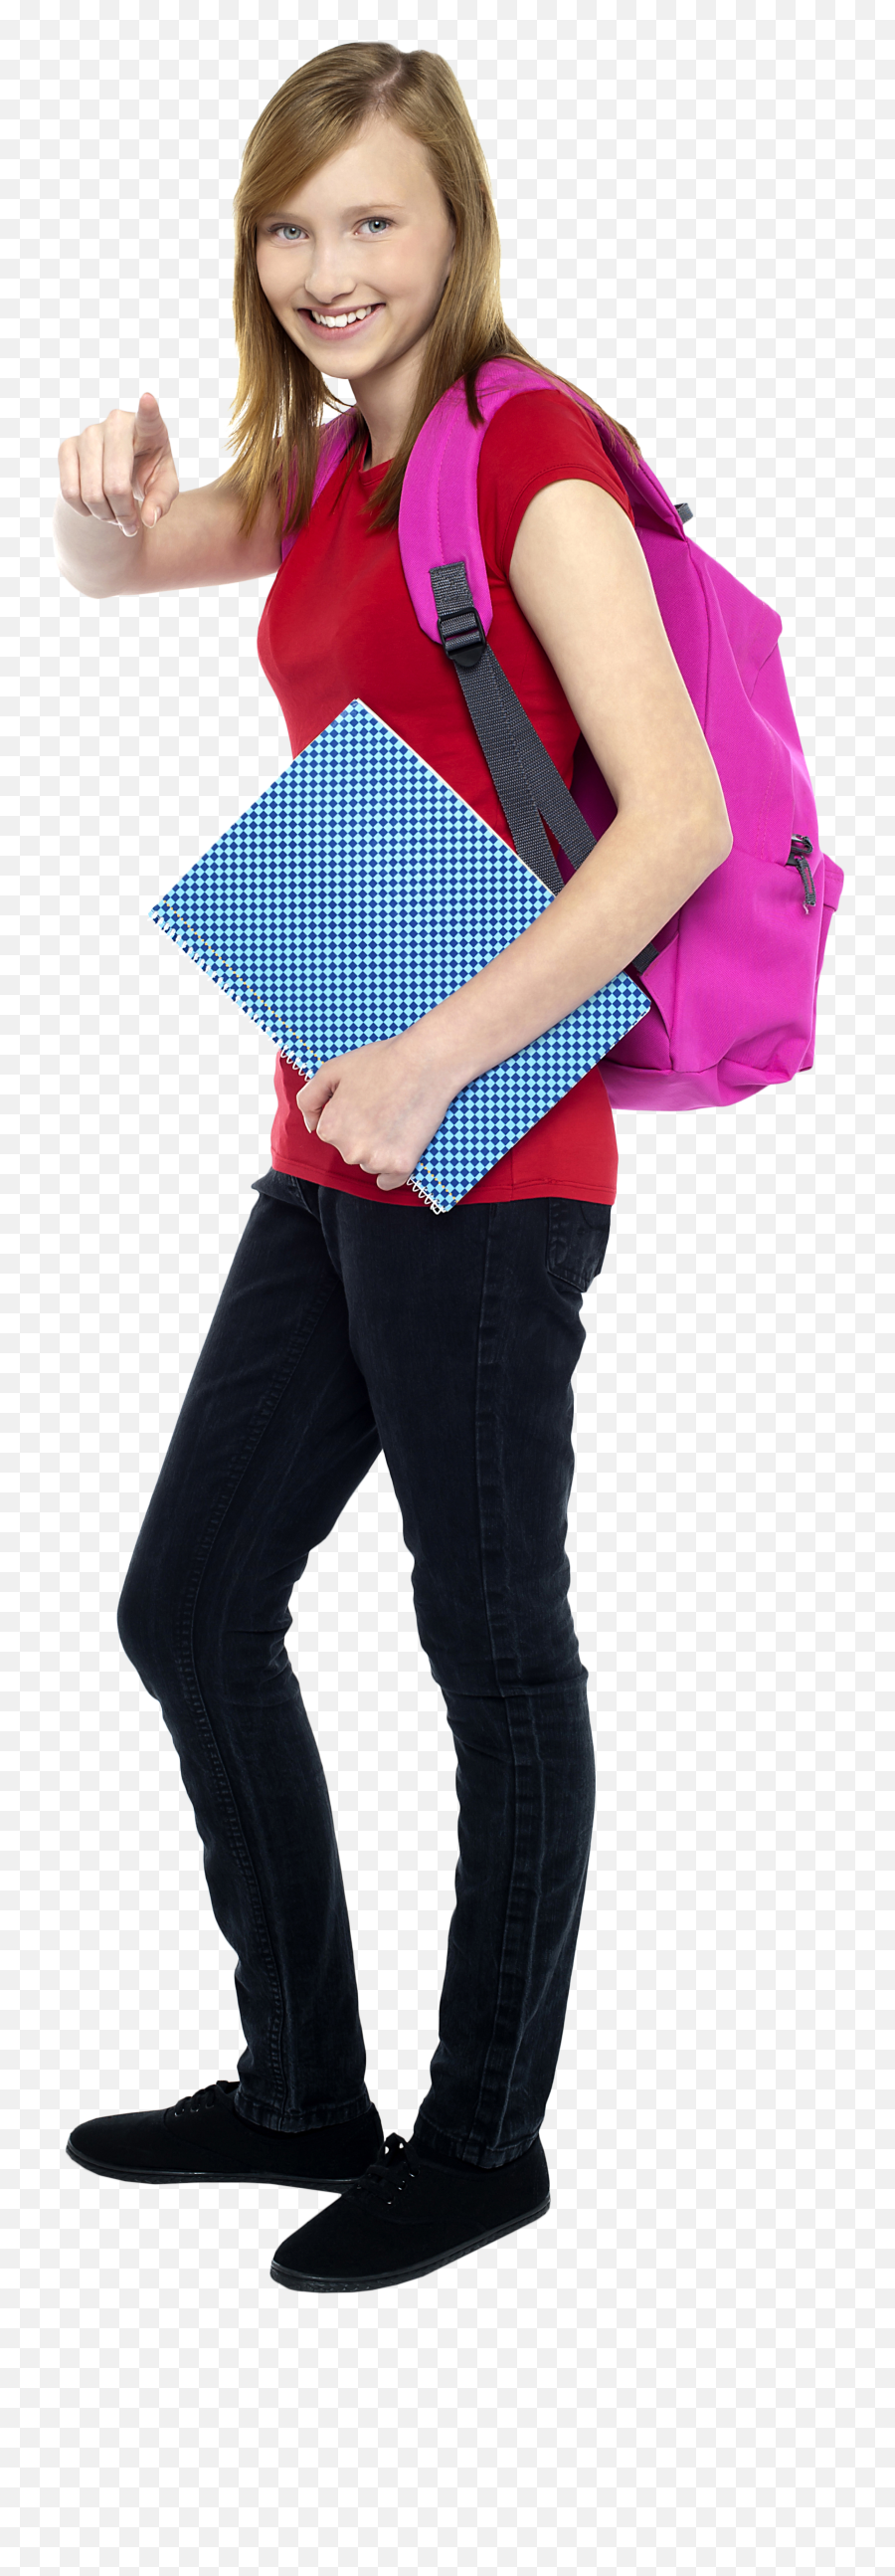 Student Free Commercial Use Png Images - College Girl Png,Free Pngs For Commercial Use